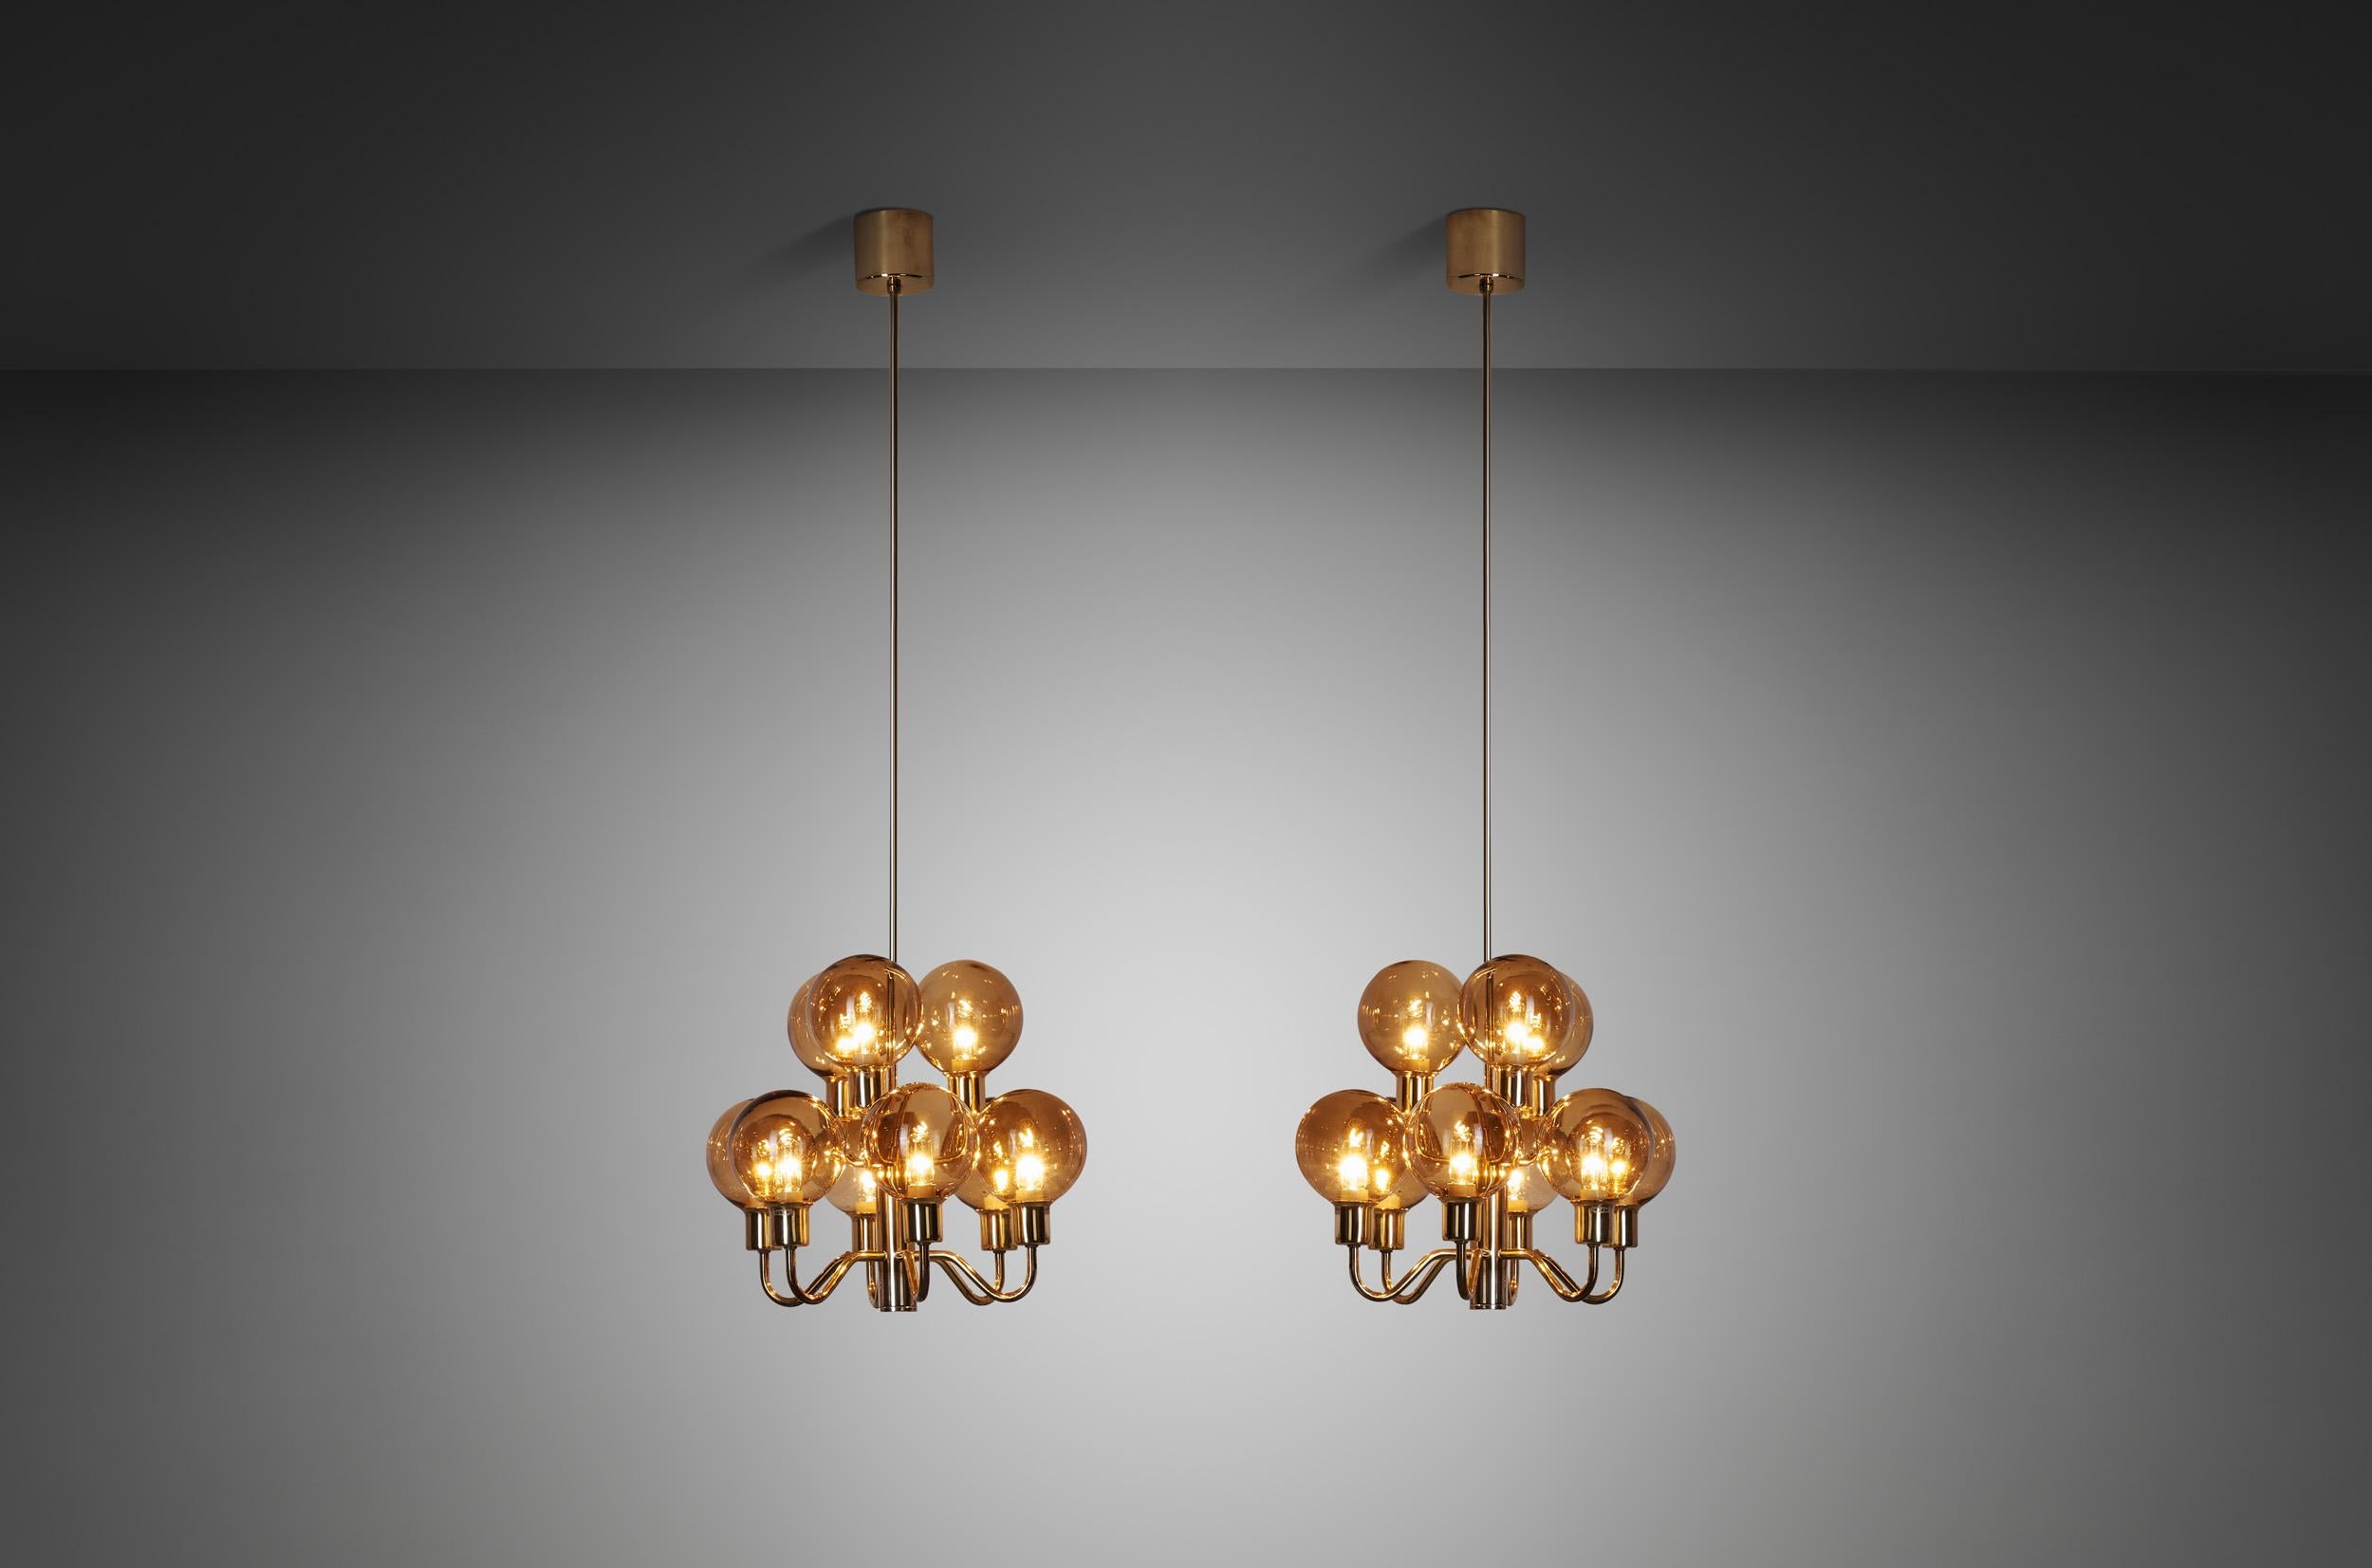 These marvellous, brass ceiling lamps were created in what we now call “the golden age of Scandinavian design”. Hans-Agne Jakobsson was the great Swedish master of lighting, designing some of the most recognizable mid-century modern lamps of